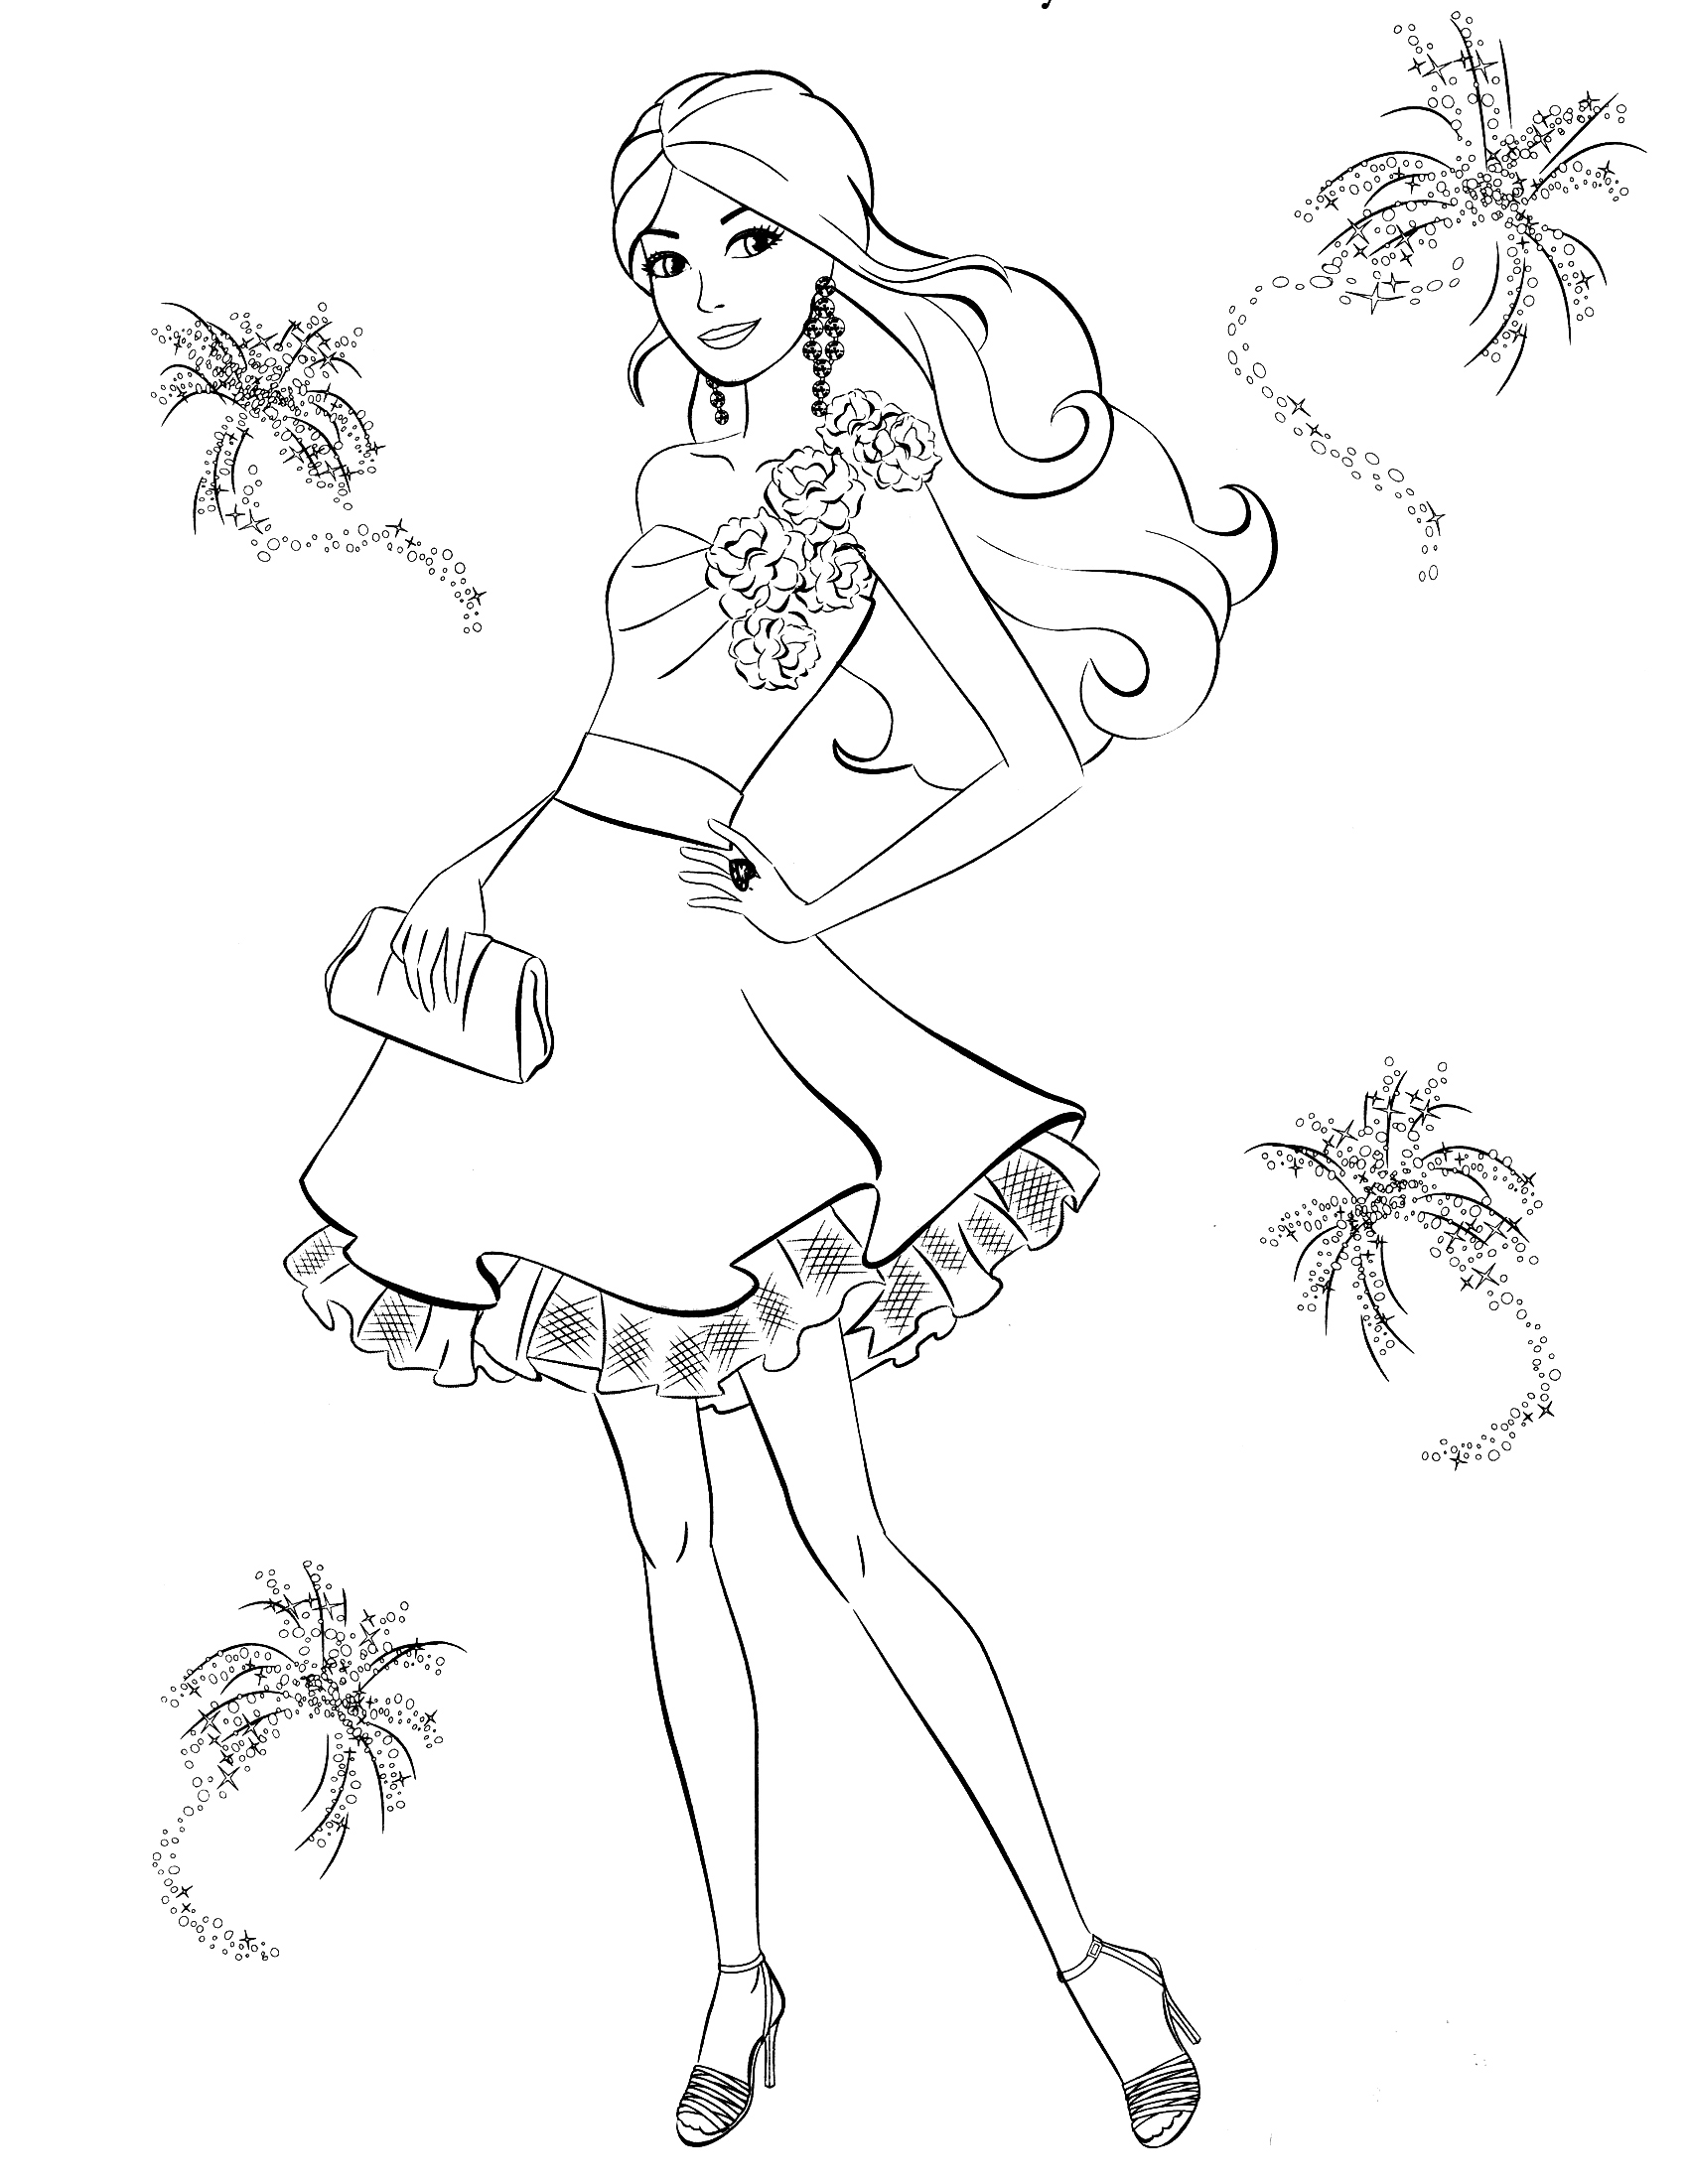 Barbie And Friends Coloring Pages at GetColorings.com | Free printable